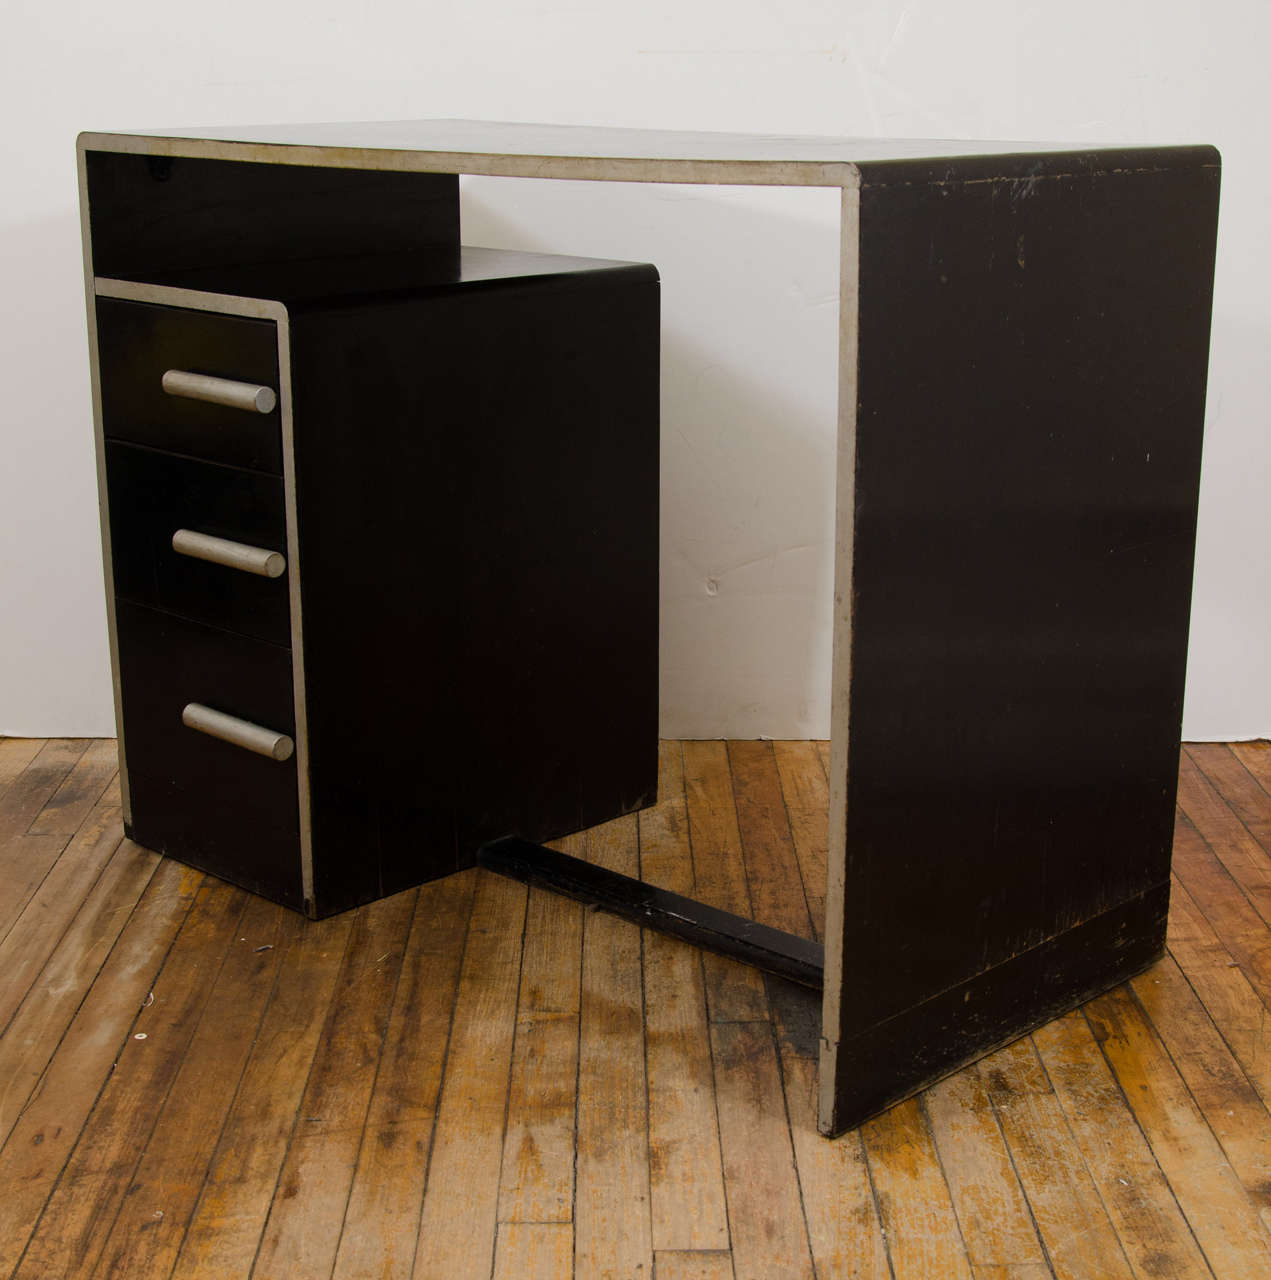 An Art Deco black and silver enamel desk attributed to Paul Frankl.

Good vintage condition with some scratches and wear.